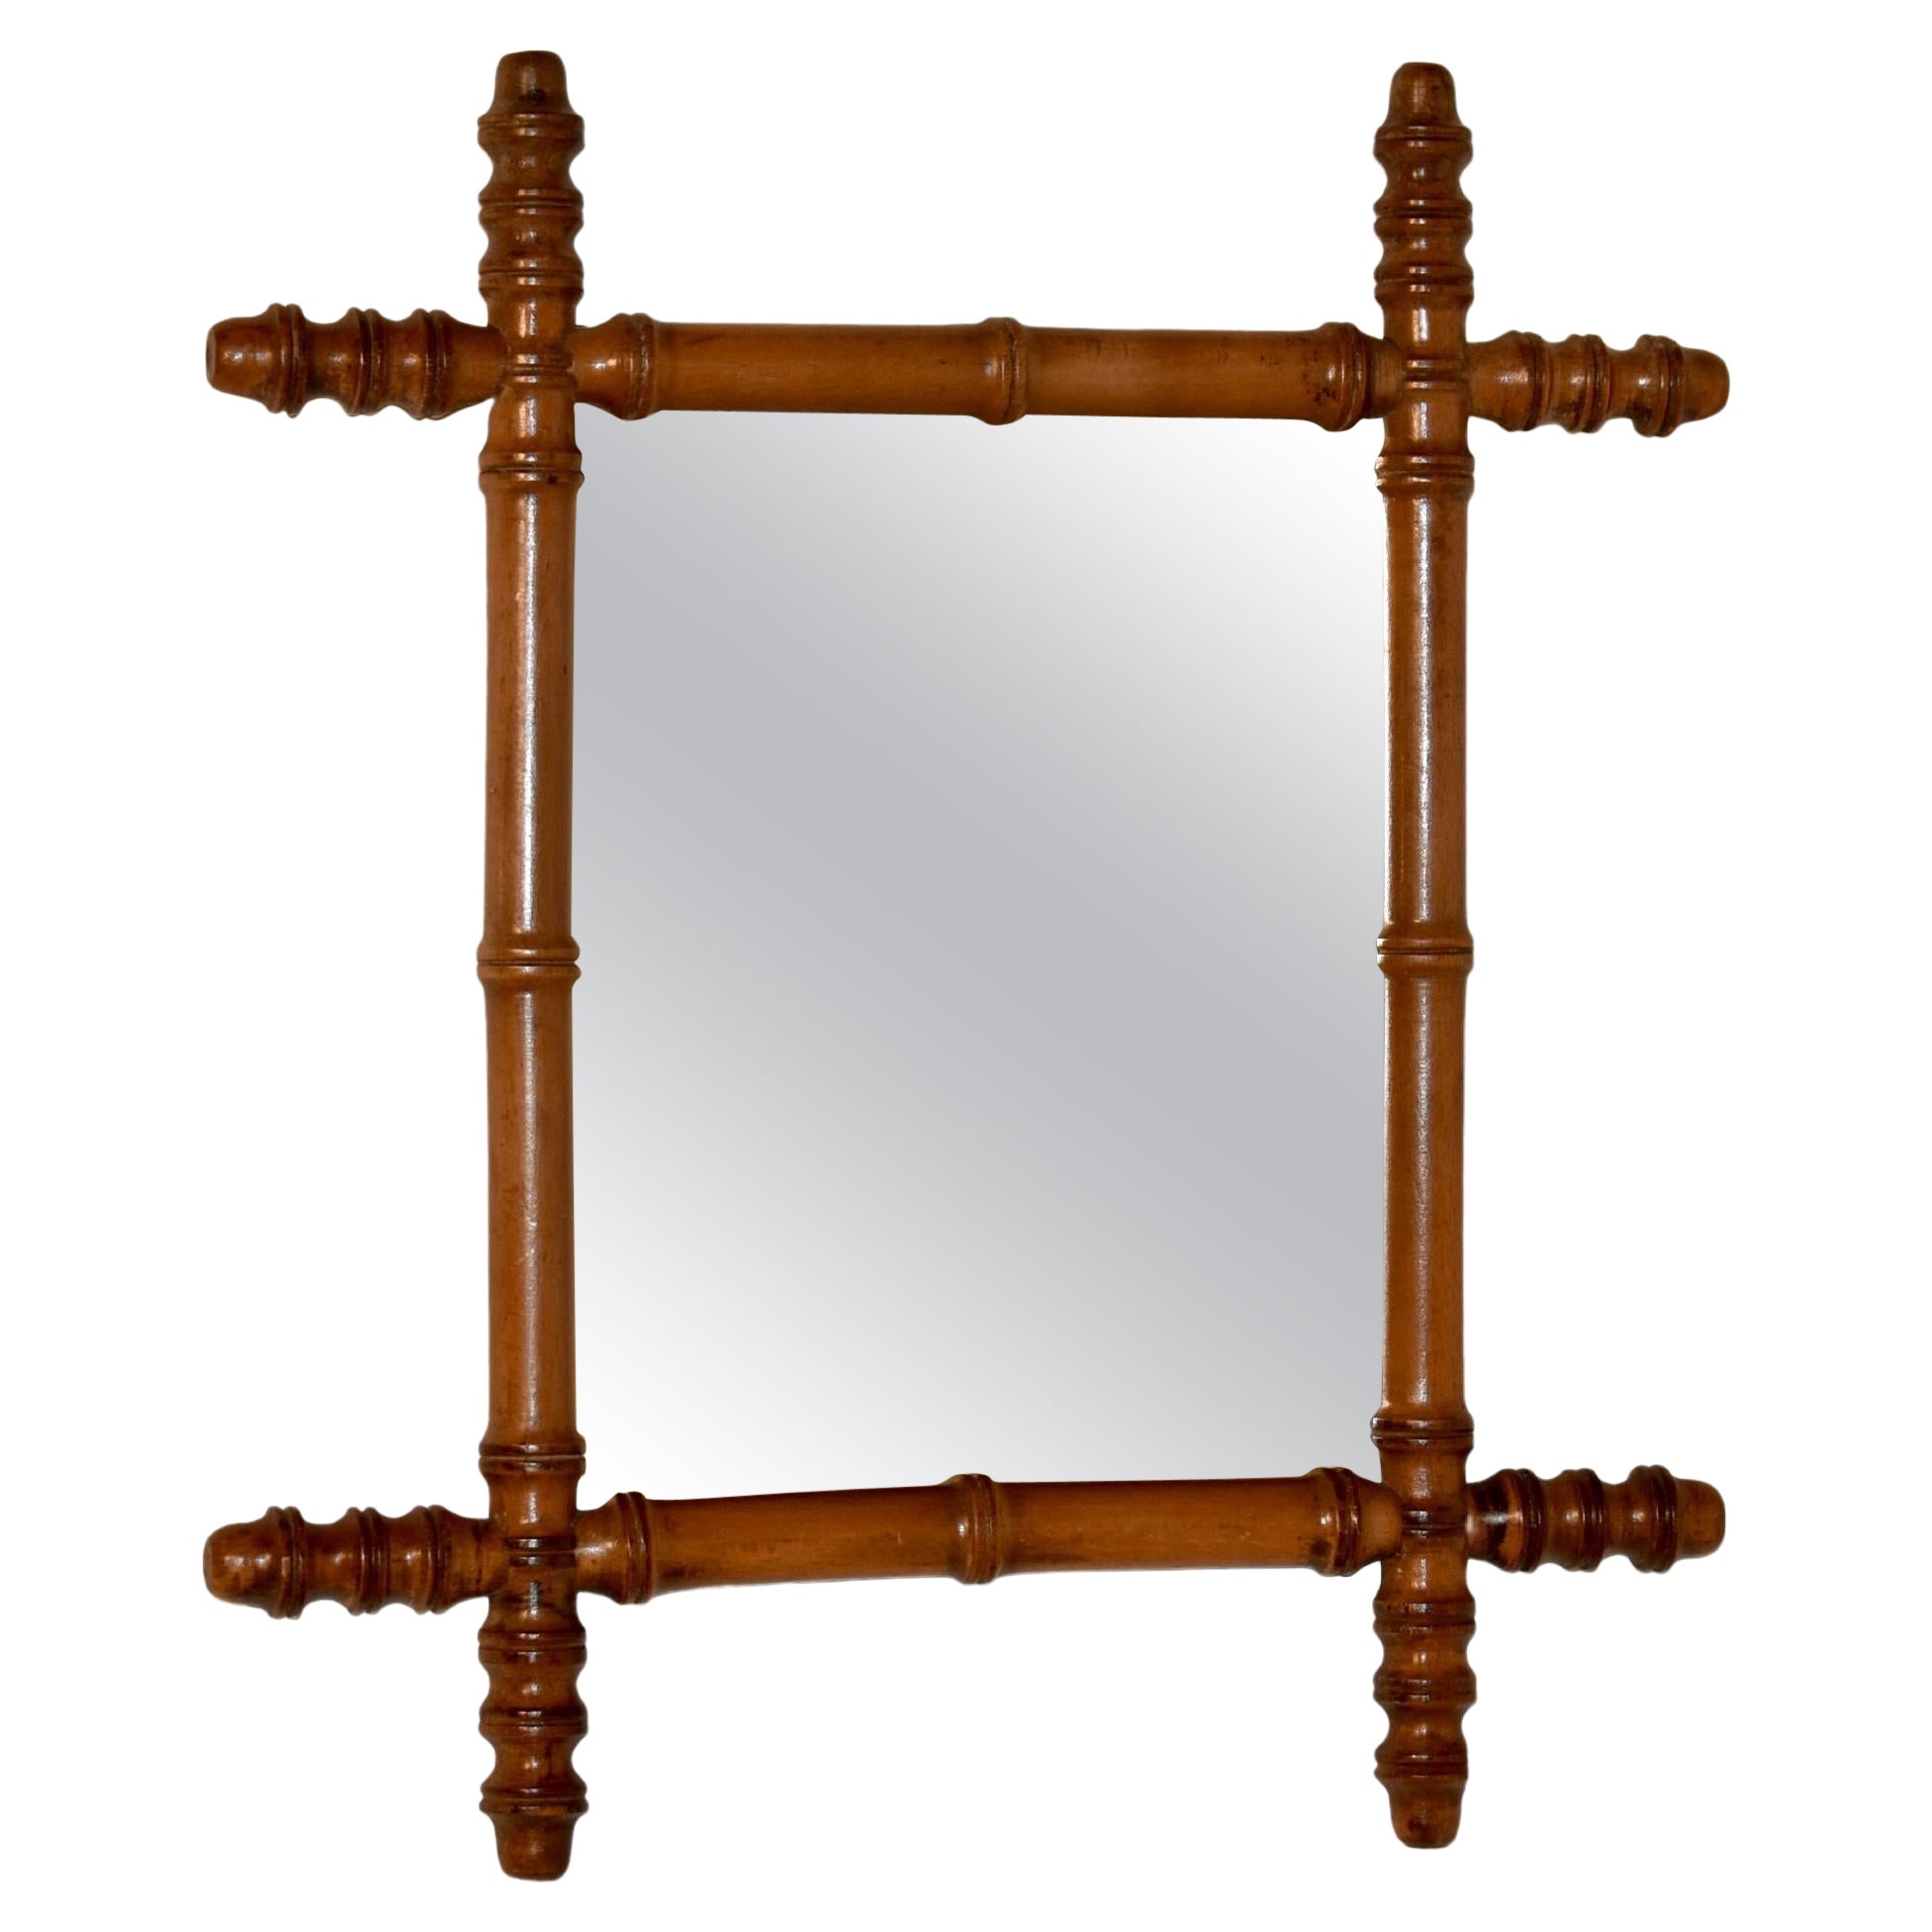 19th Century Faux Bamboo Wall Mirror